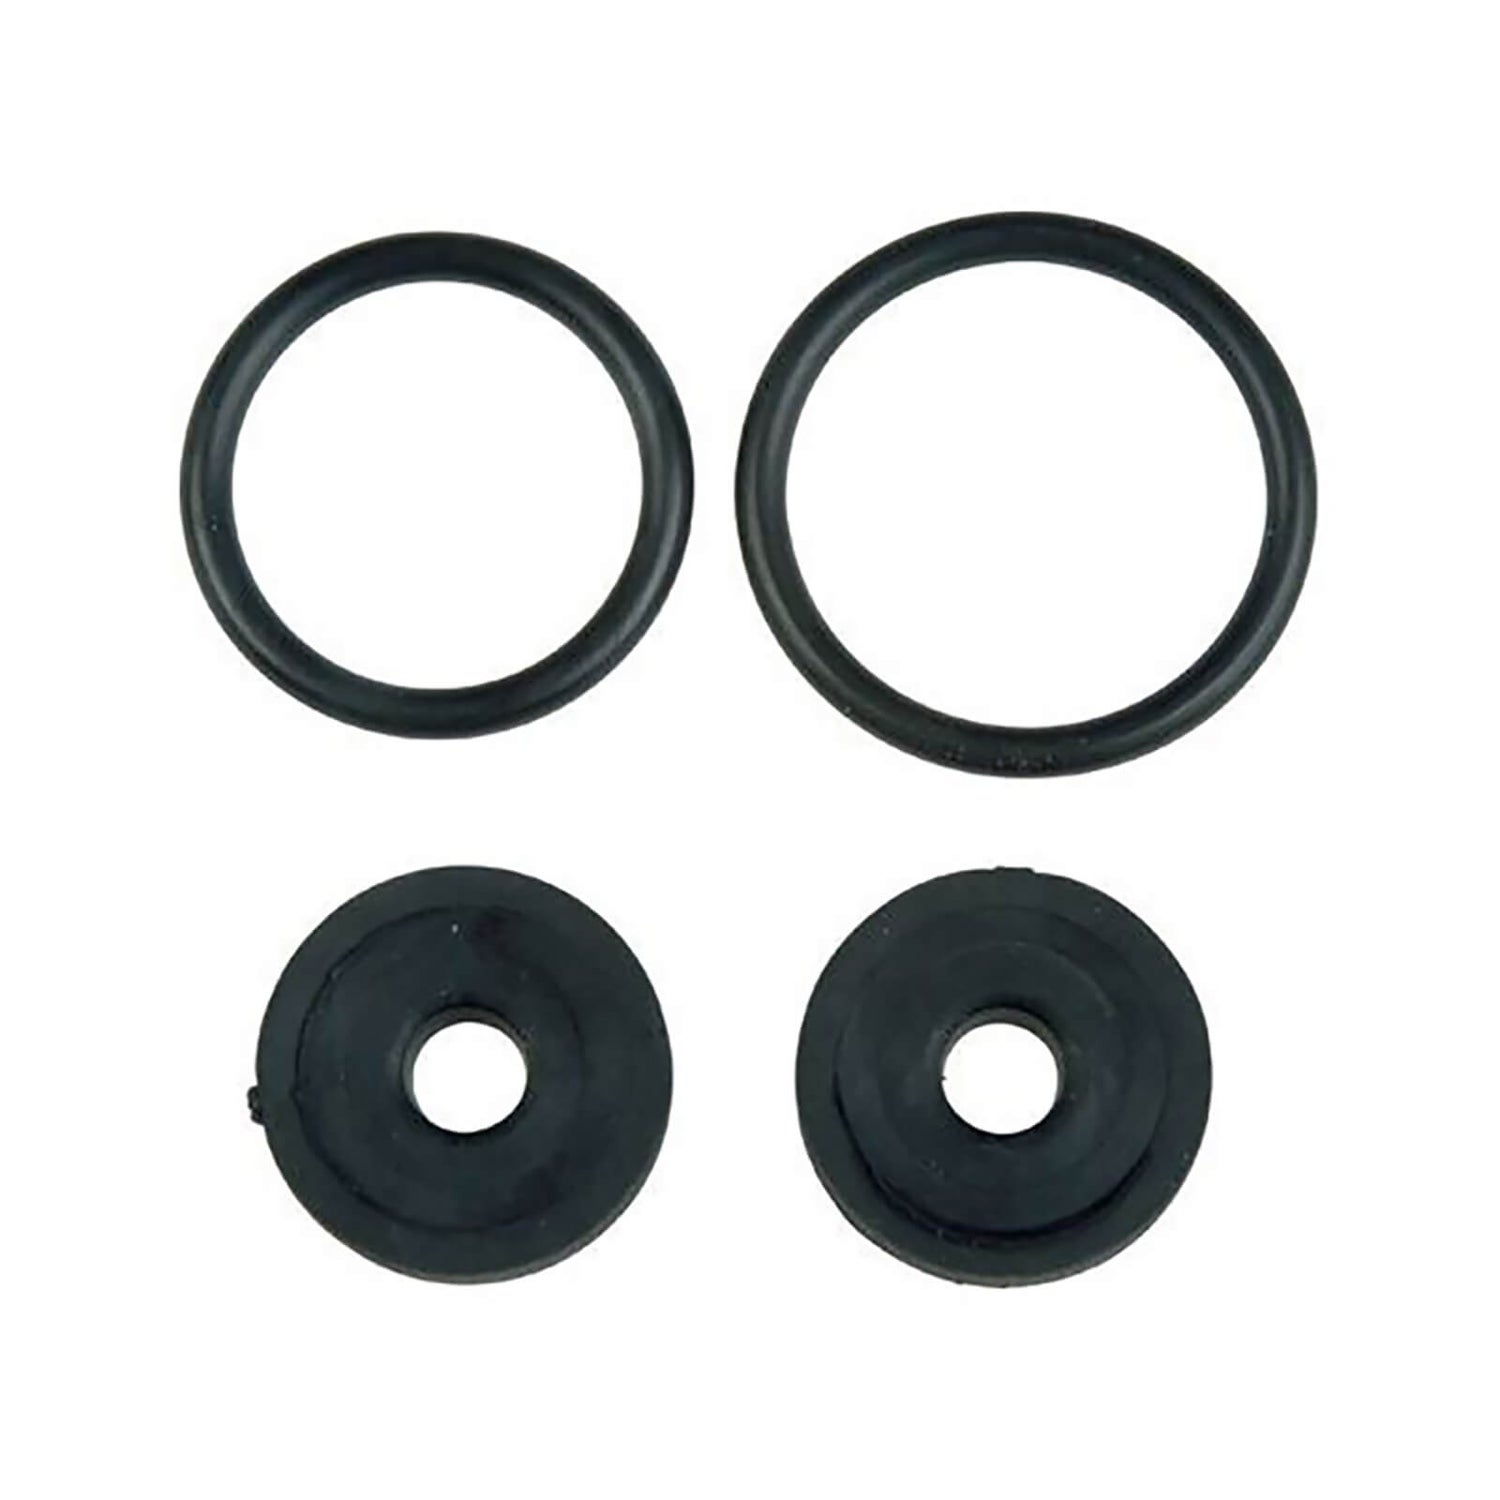 TANTOFEX TAP WASHERS SET